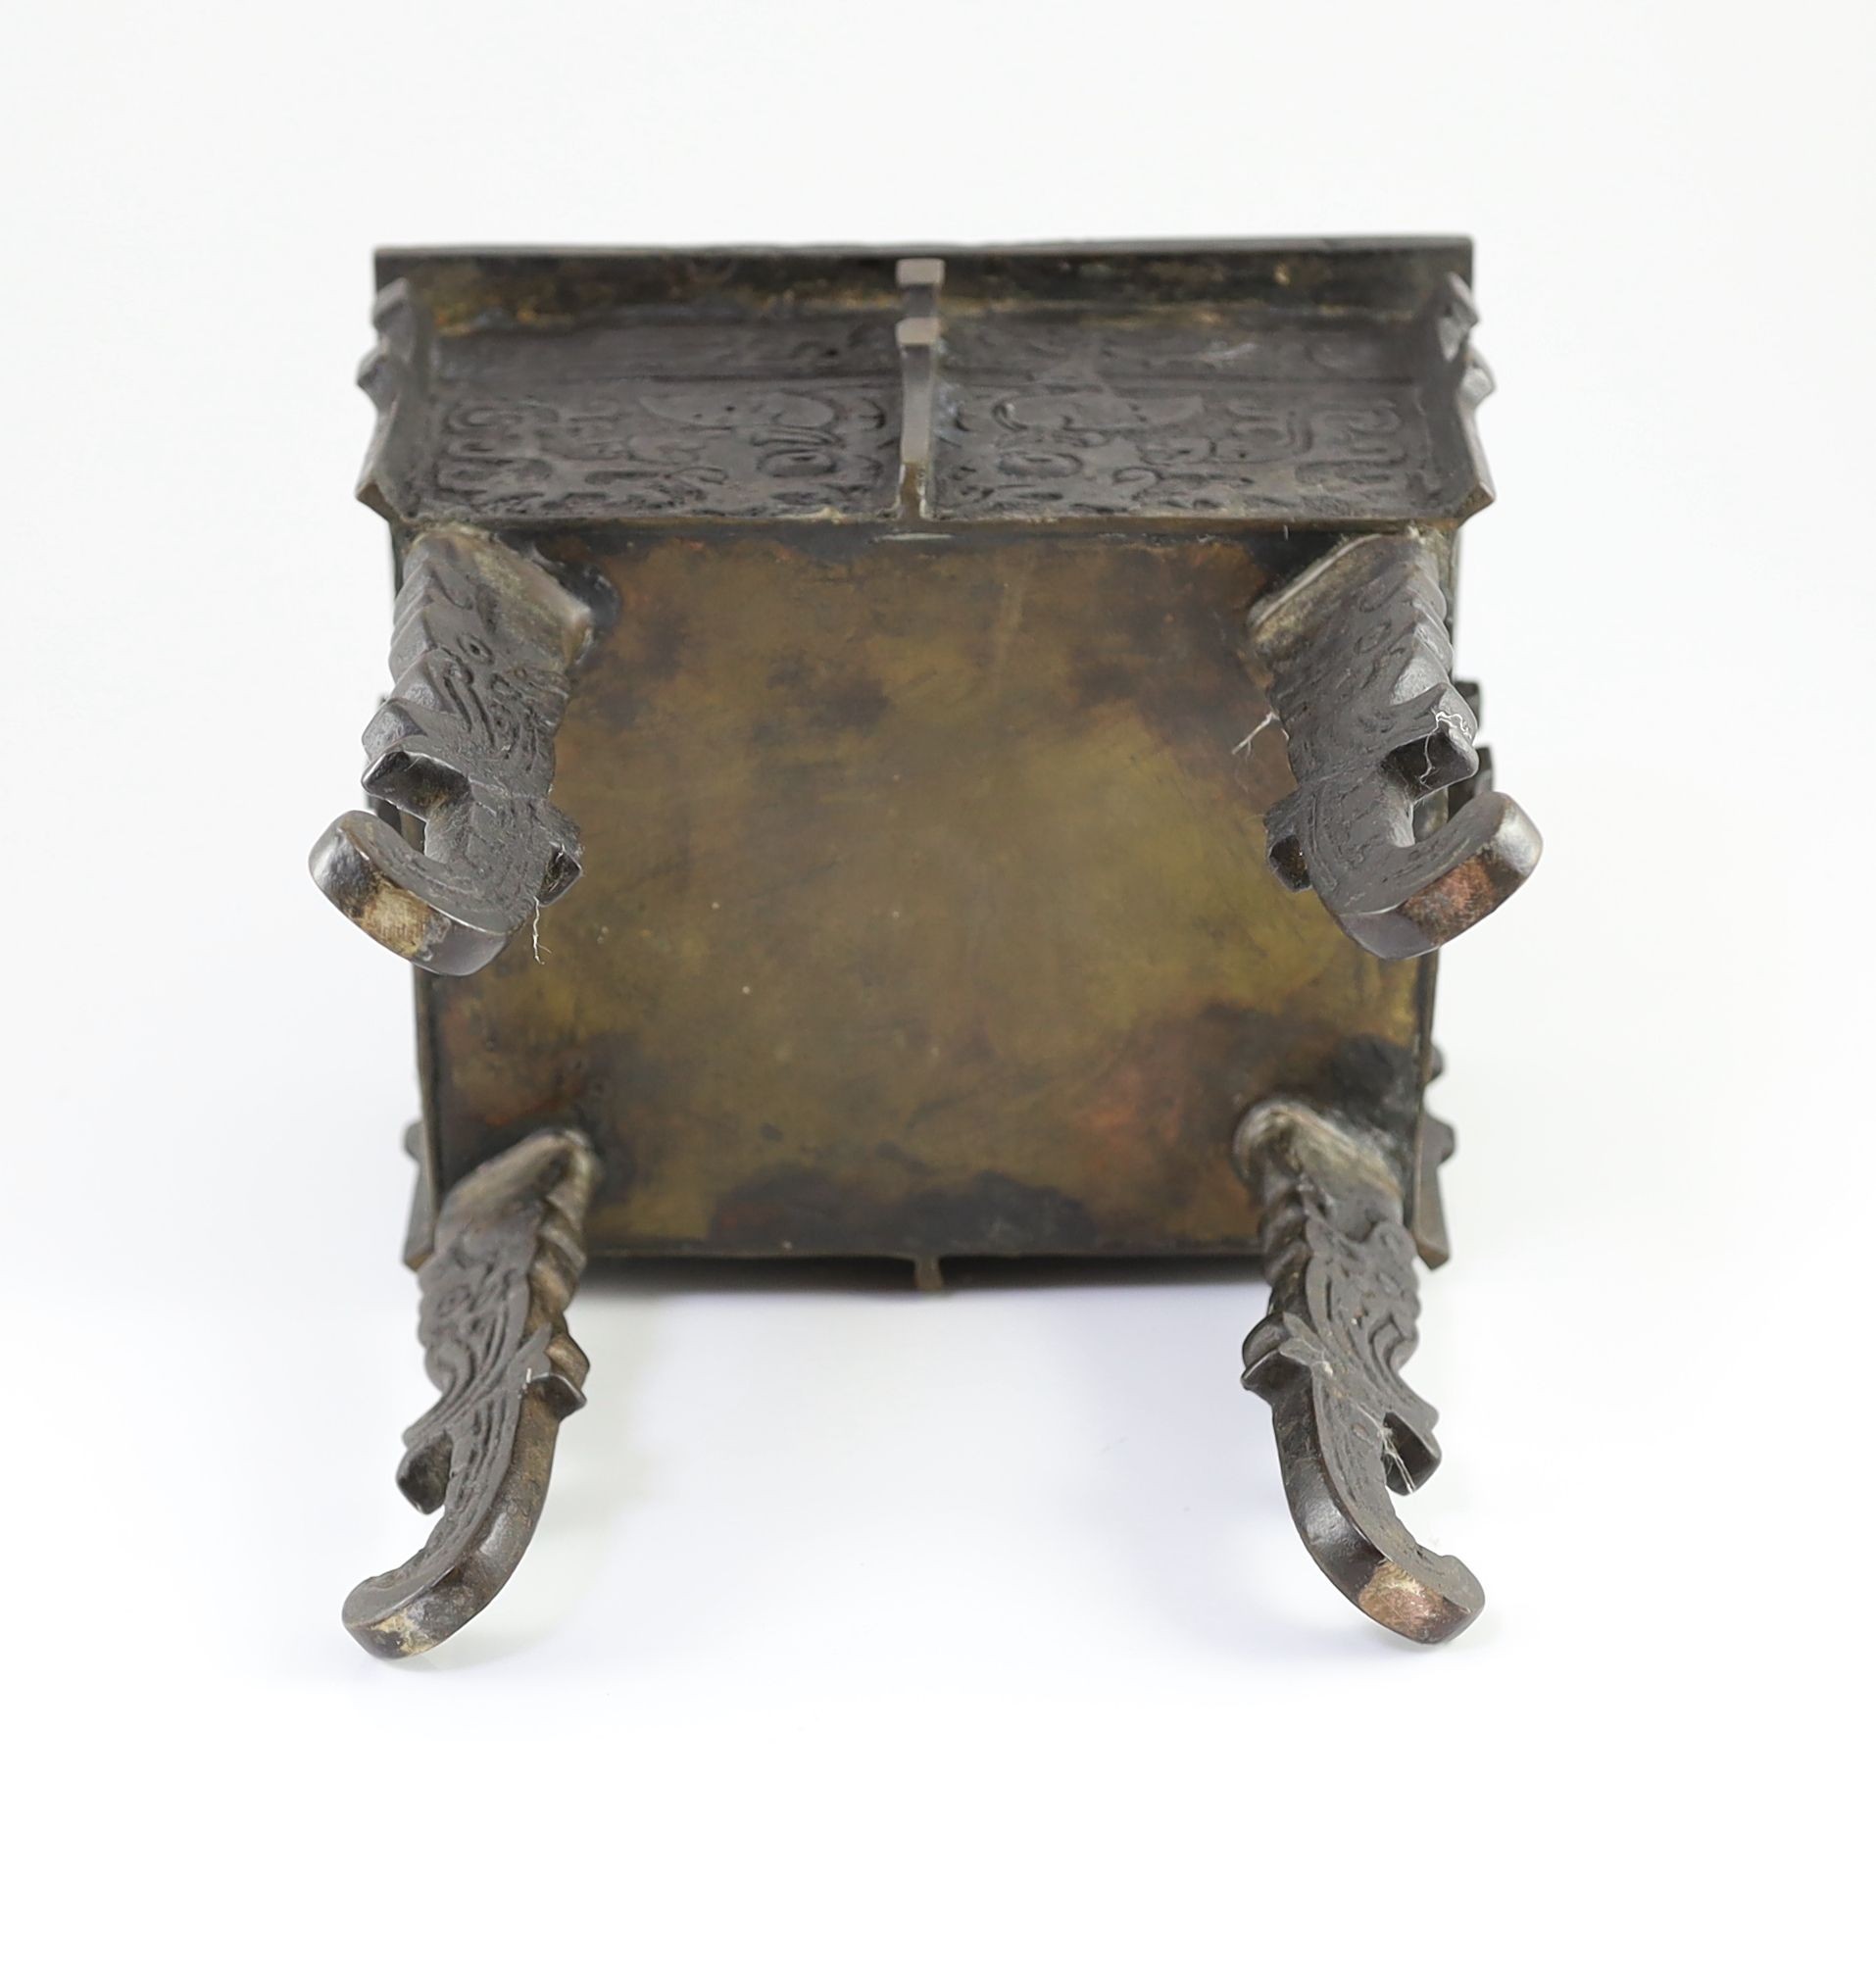 A Chinese archaistic bronze rectangular censer, fangding, 17th/18th centurydecorated in low relief - Image 6 of 6